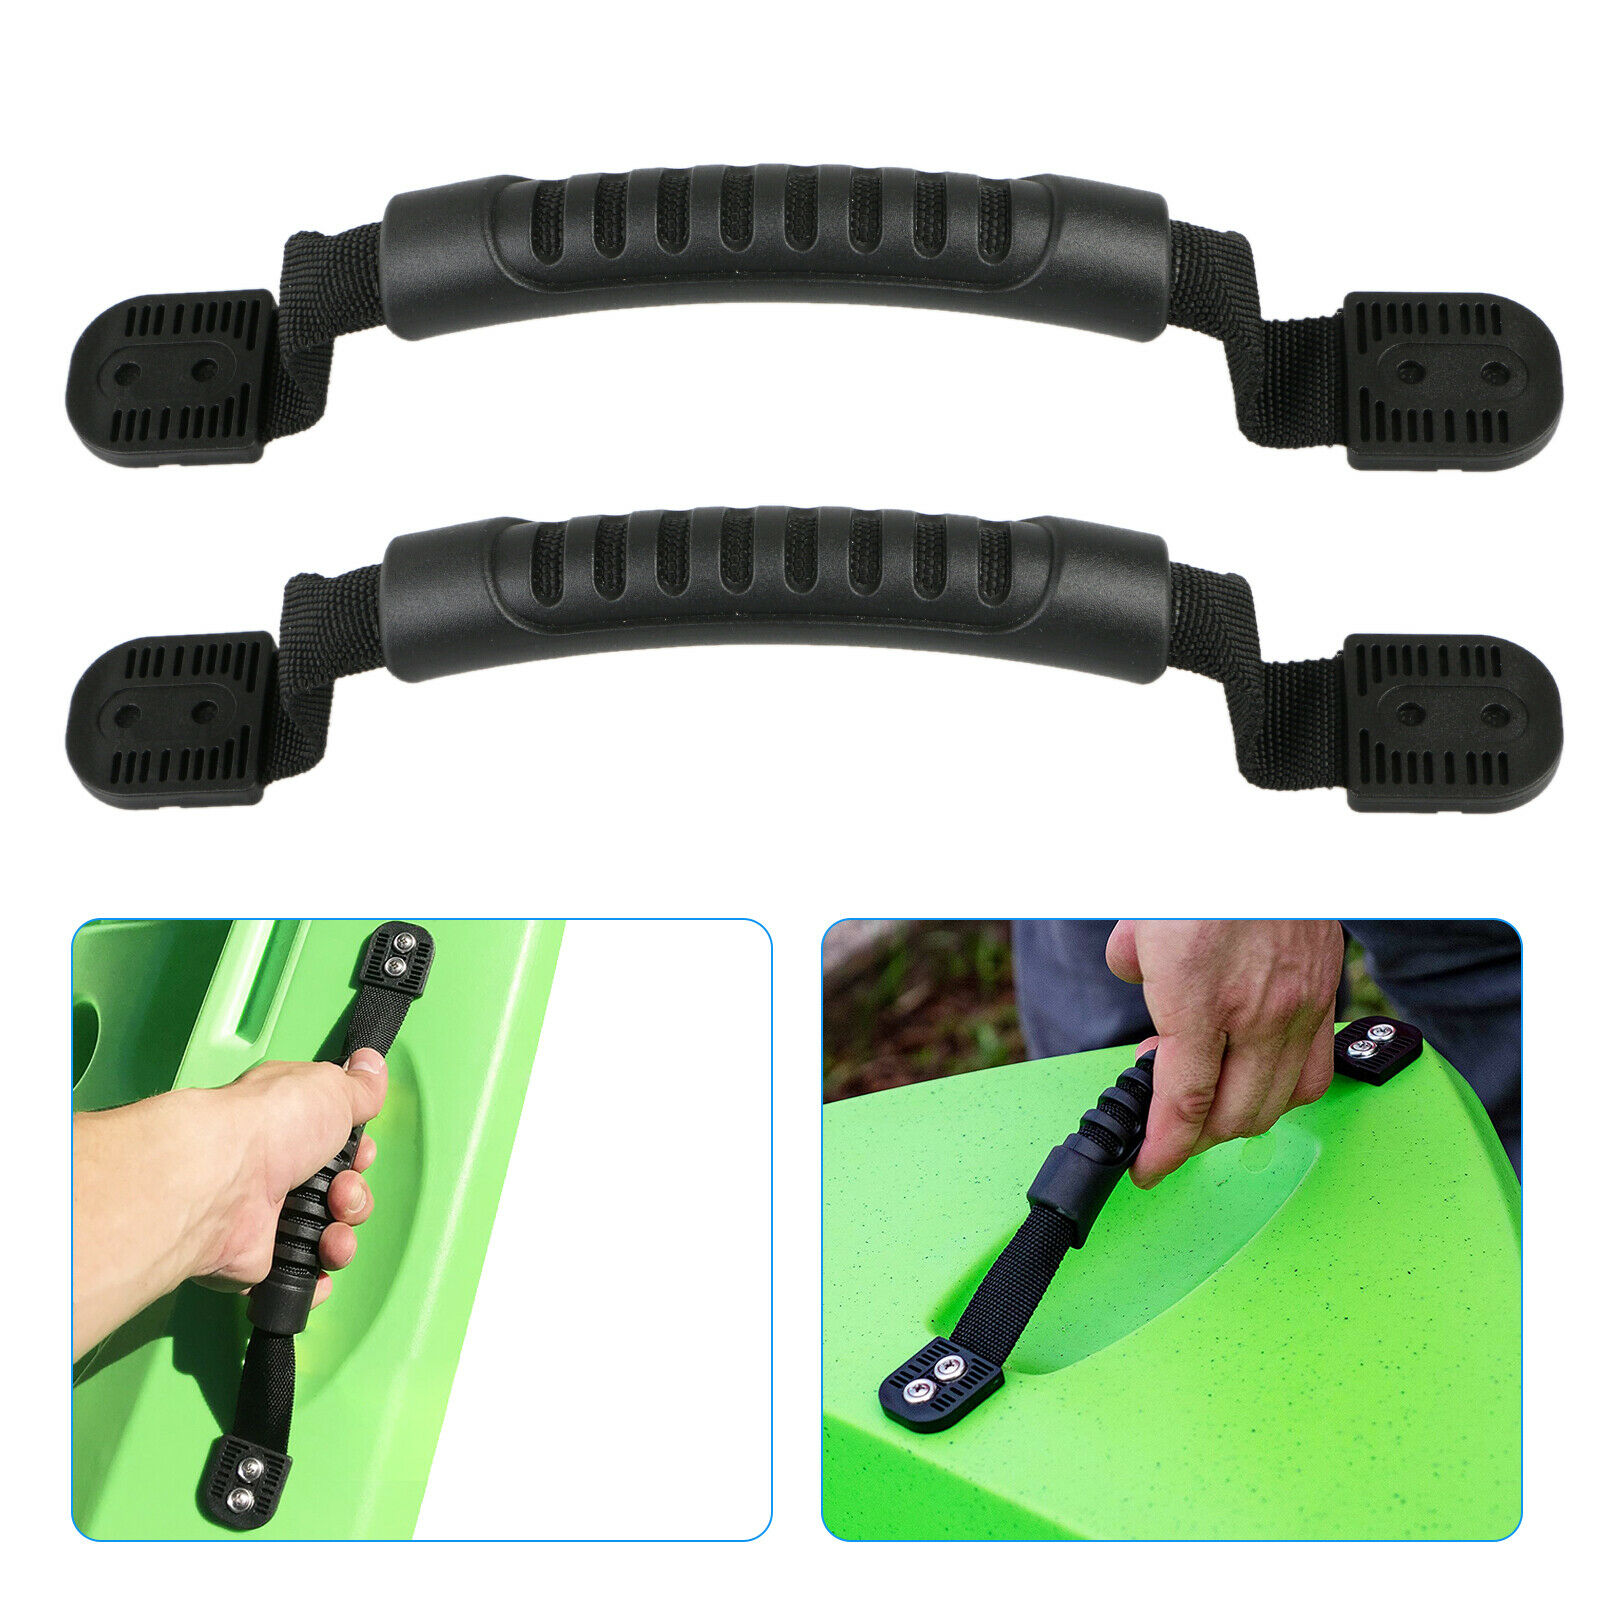 1-4x Boat Luggage Side Mount Carry Handles Fitting for Kayak Canoe Boat US Fast